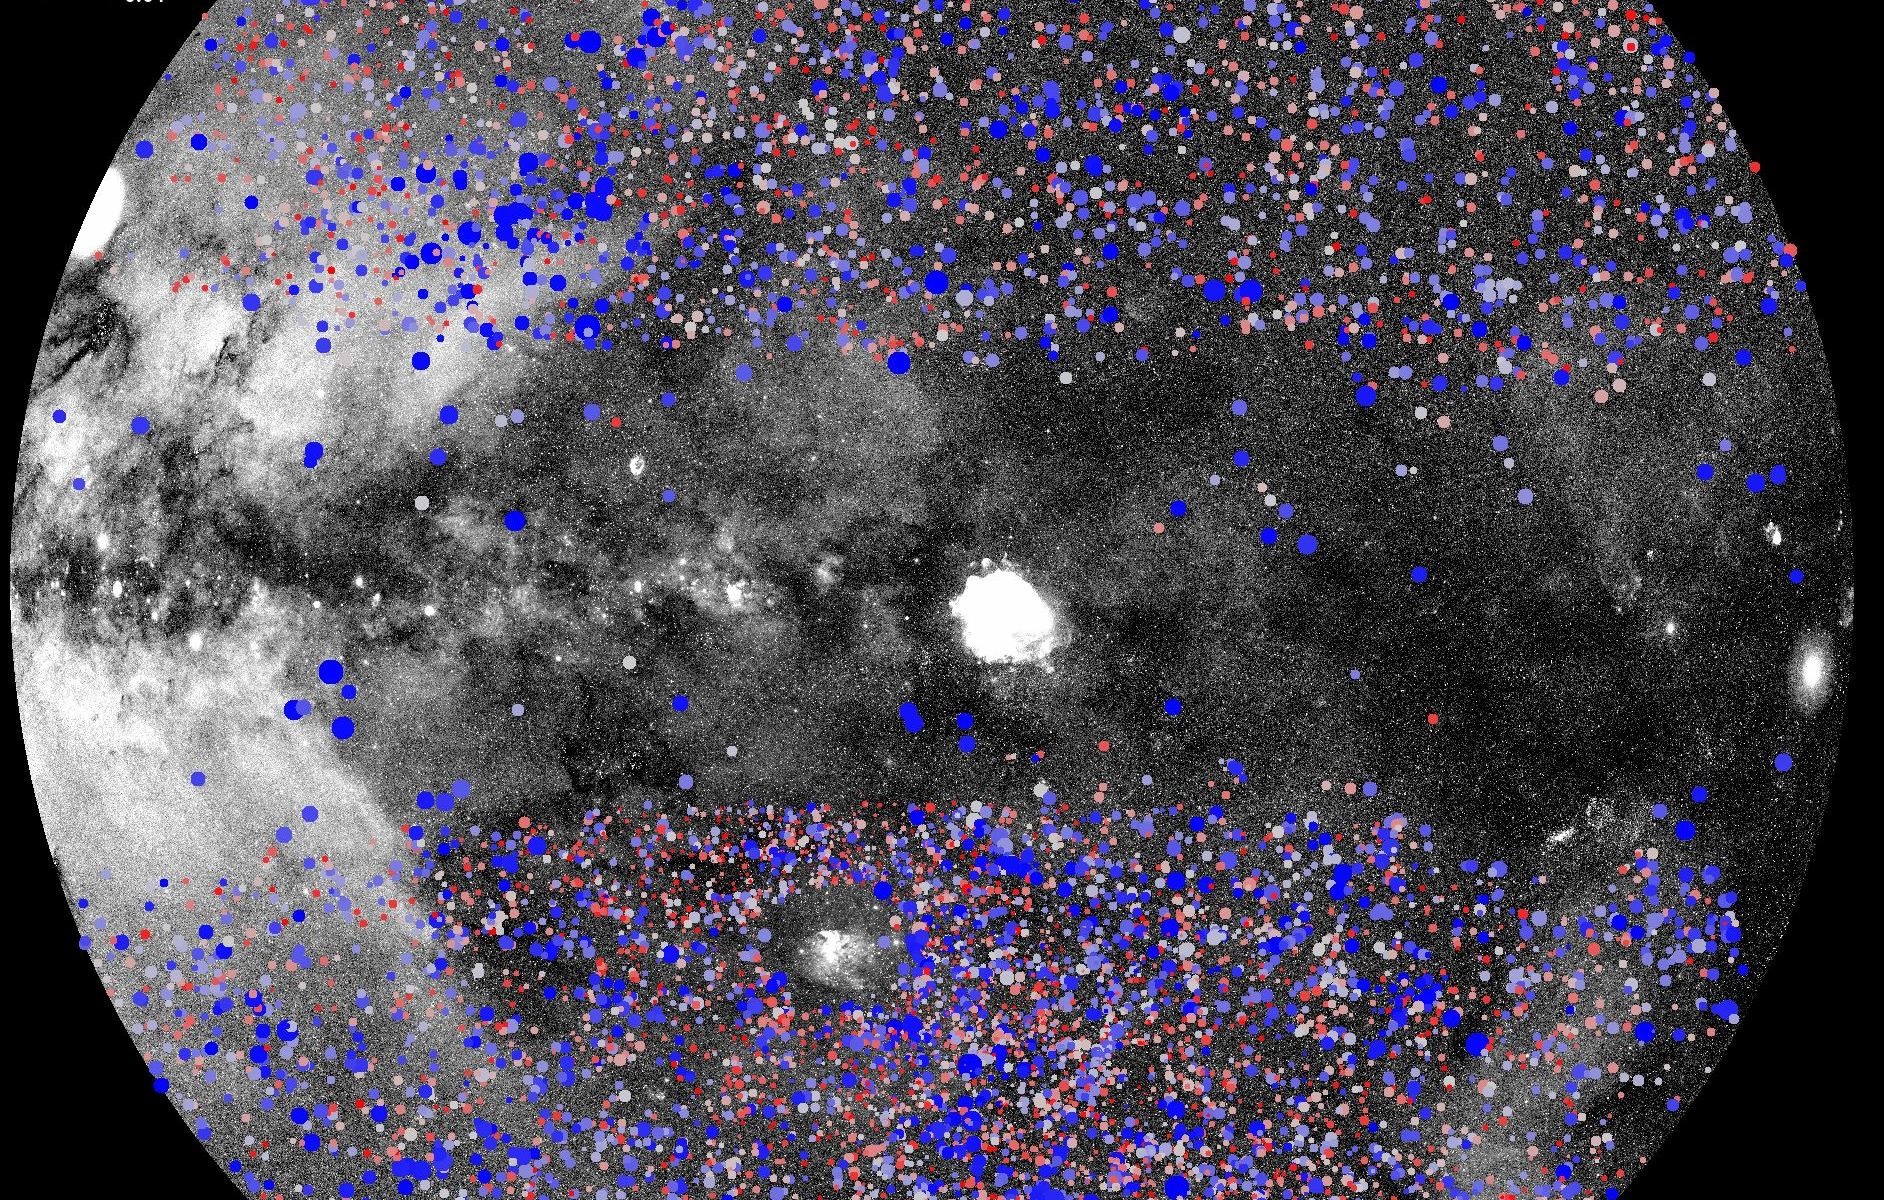 Clusters of galaxies as observed by the eROSITA instrument. Colors indicate the redshift of the clusters, up to about 9 billion years of lookback time. Credit: MPE, J. Sanders for the eROSITA consortium.